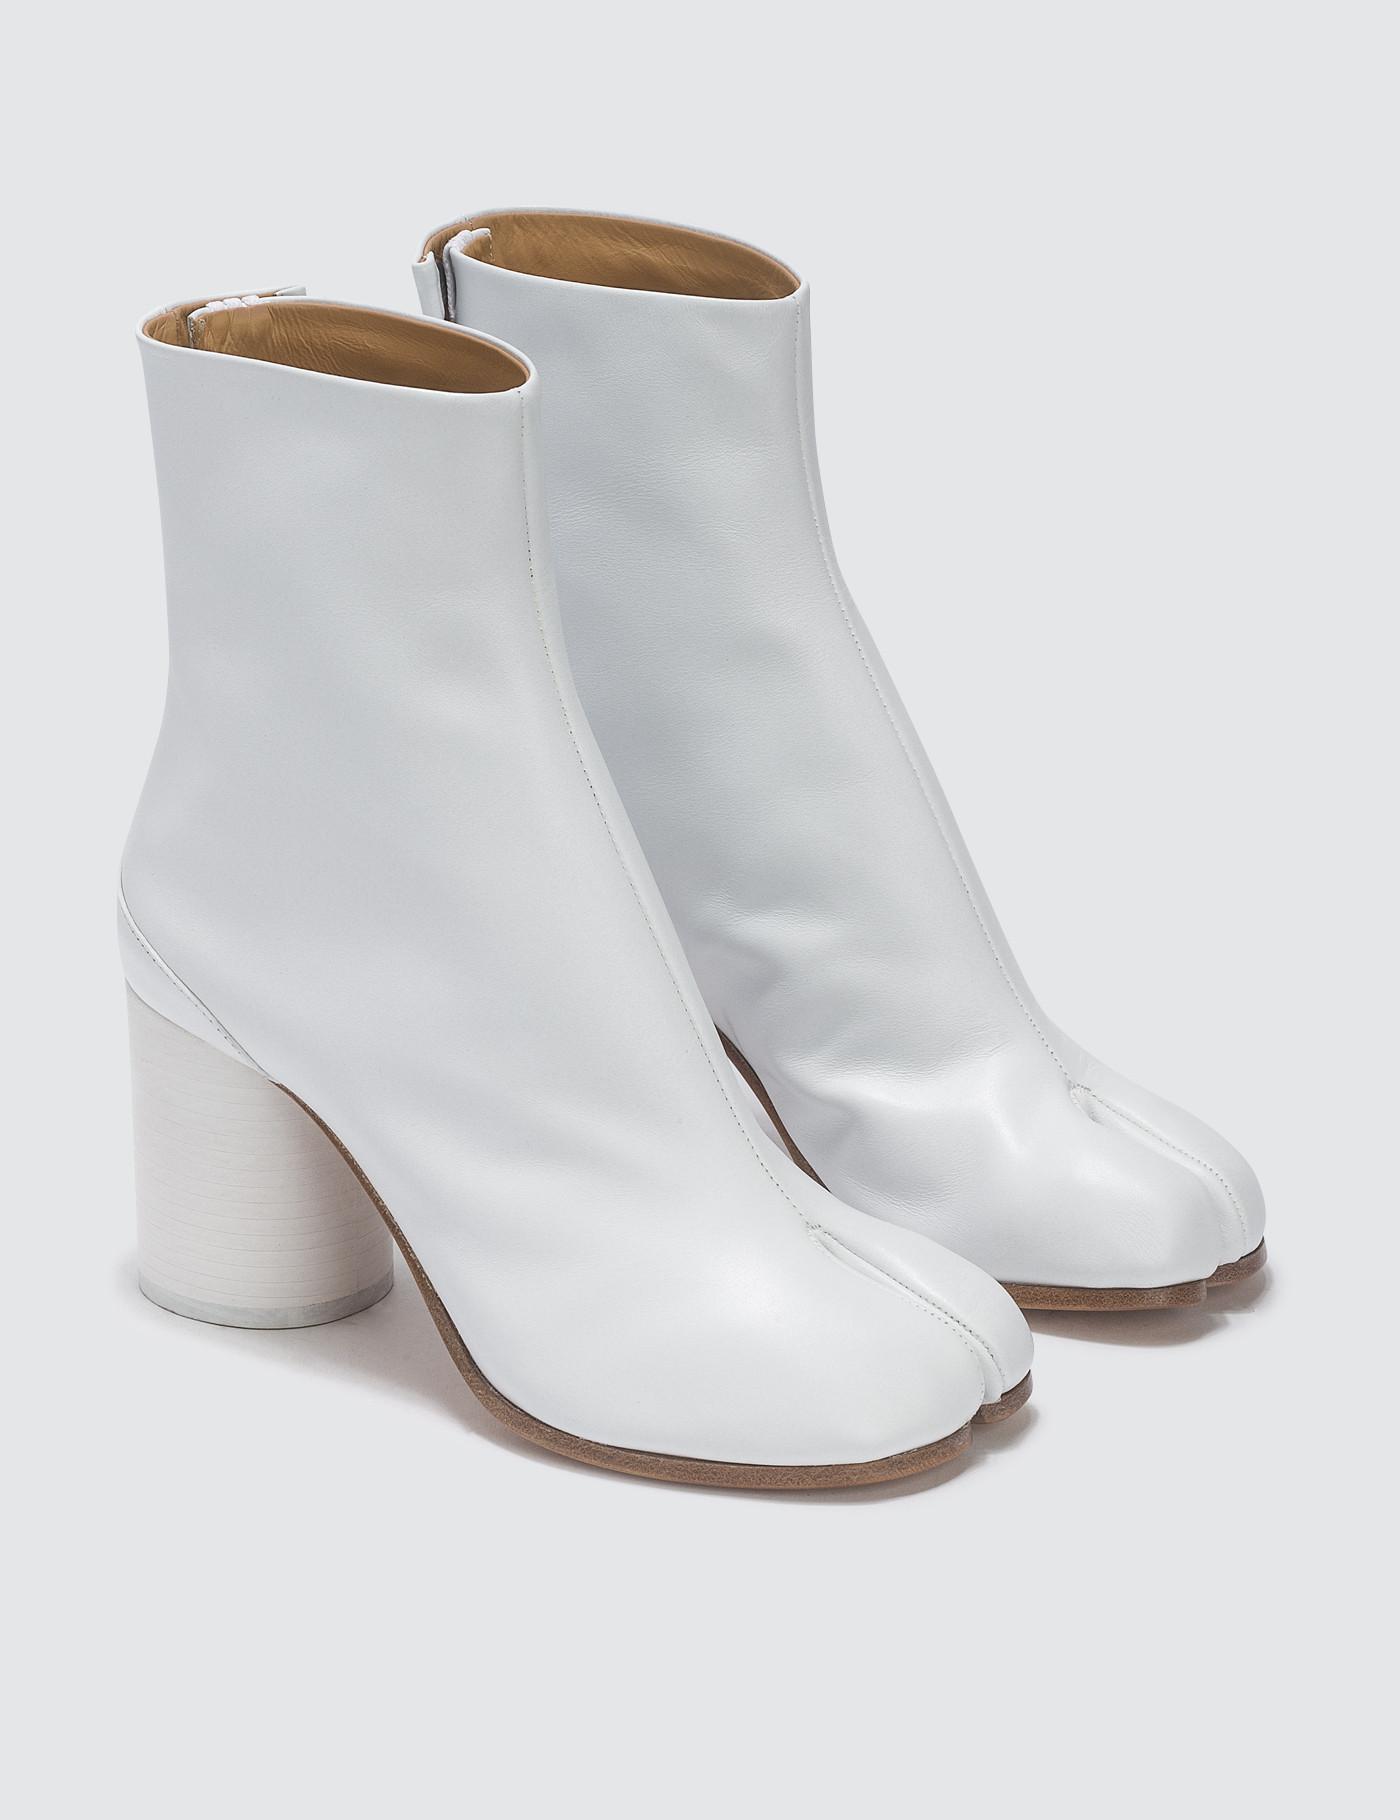 Maison Margiela Leather Tabi Boots in White - Lyst